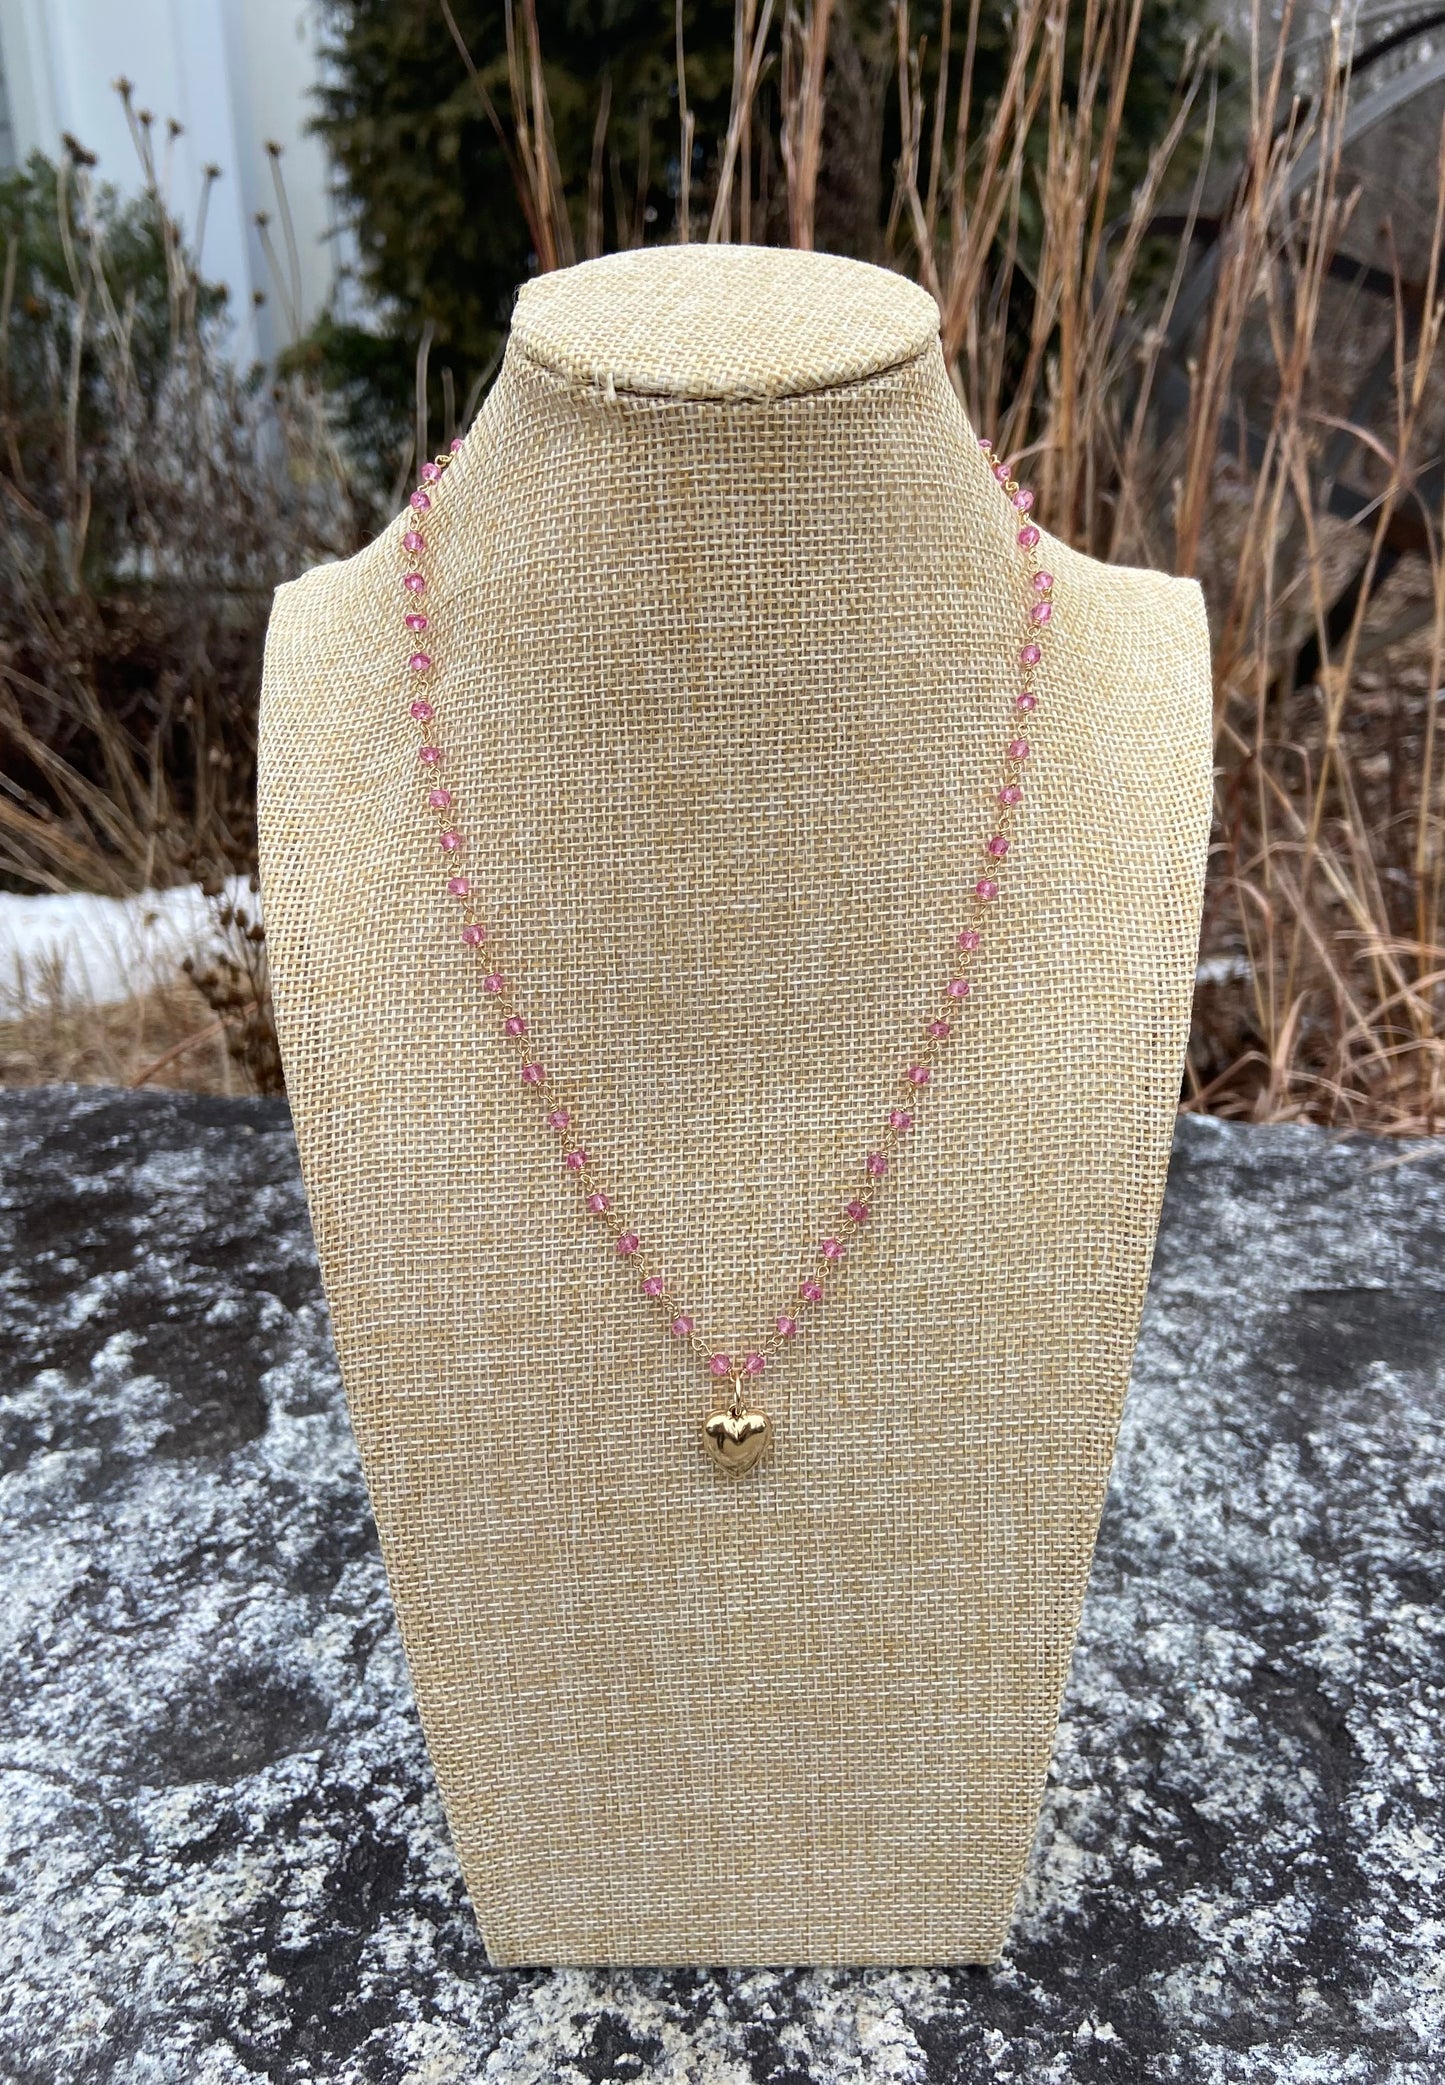 Adelaide Harris pink quartz beaded necklace with large heart charm